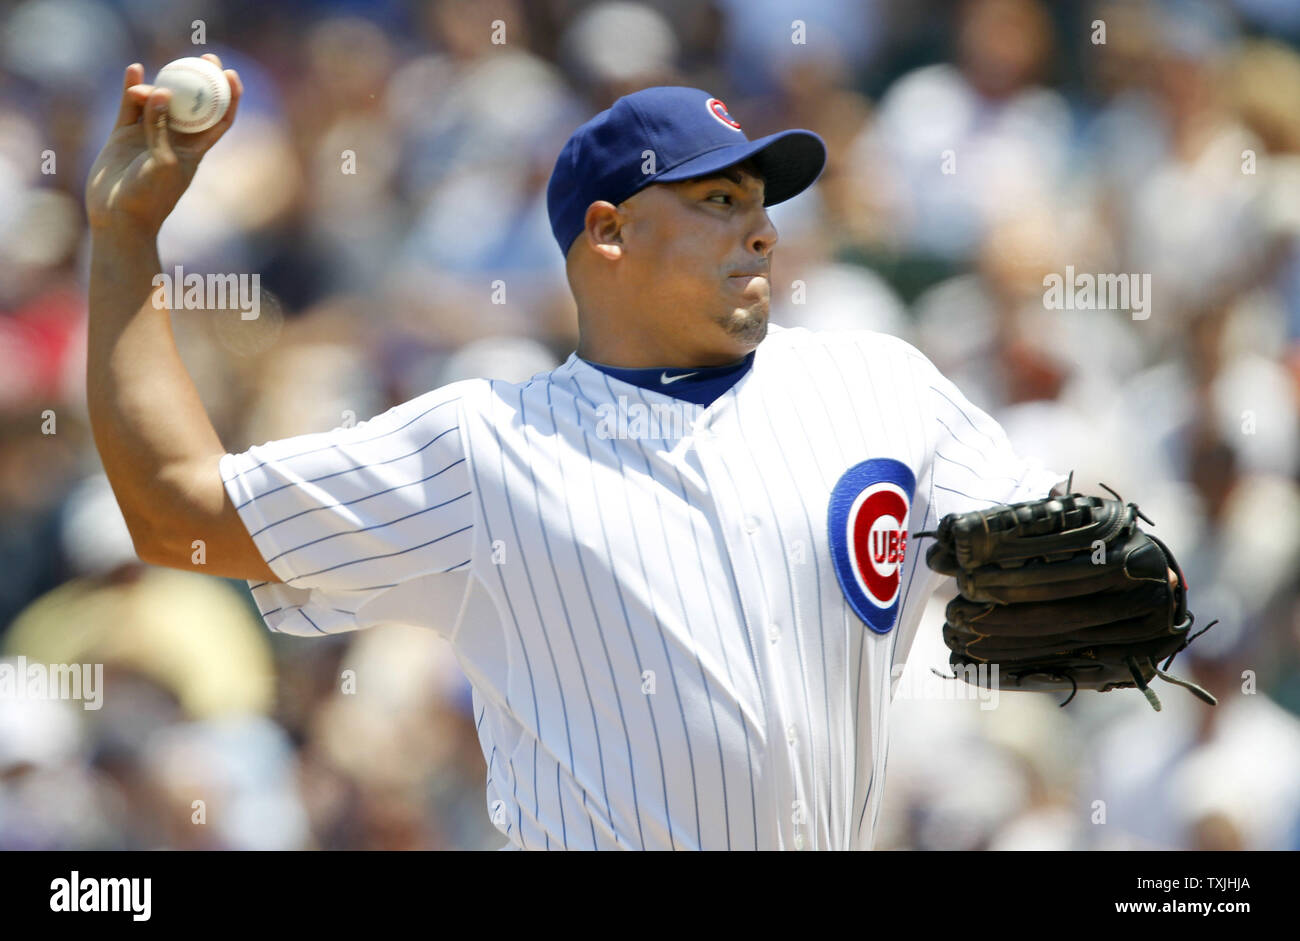 Chicago Cubs starting pitcher Carlos Zambrano throws against the San Francisco Giants during the first inning at Wrigley Field in Chicago on June 30, 2011.  UPI /Mark Cowan Stock Photo